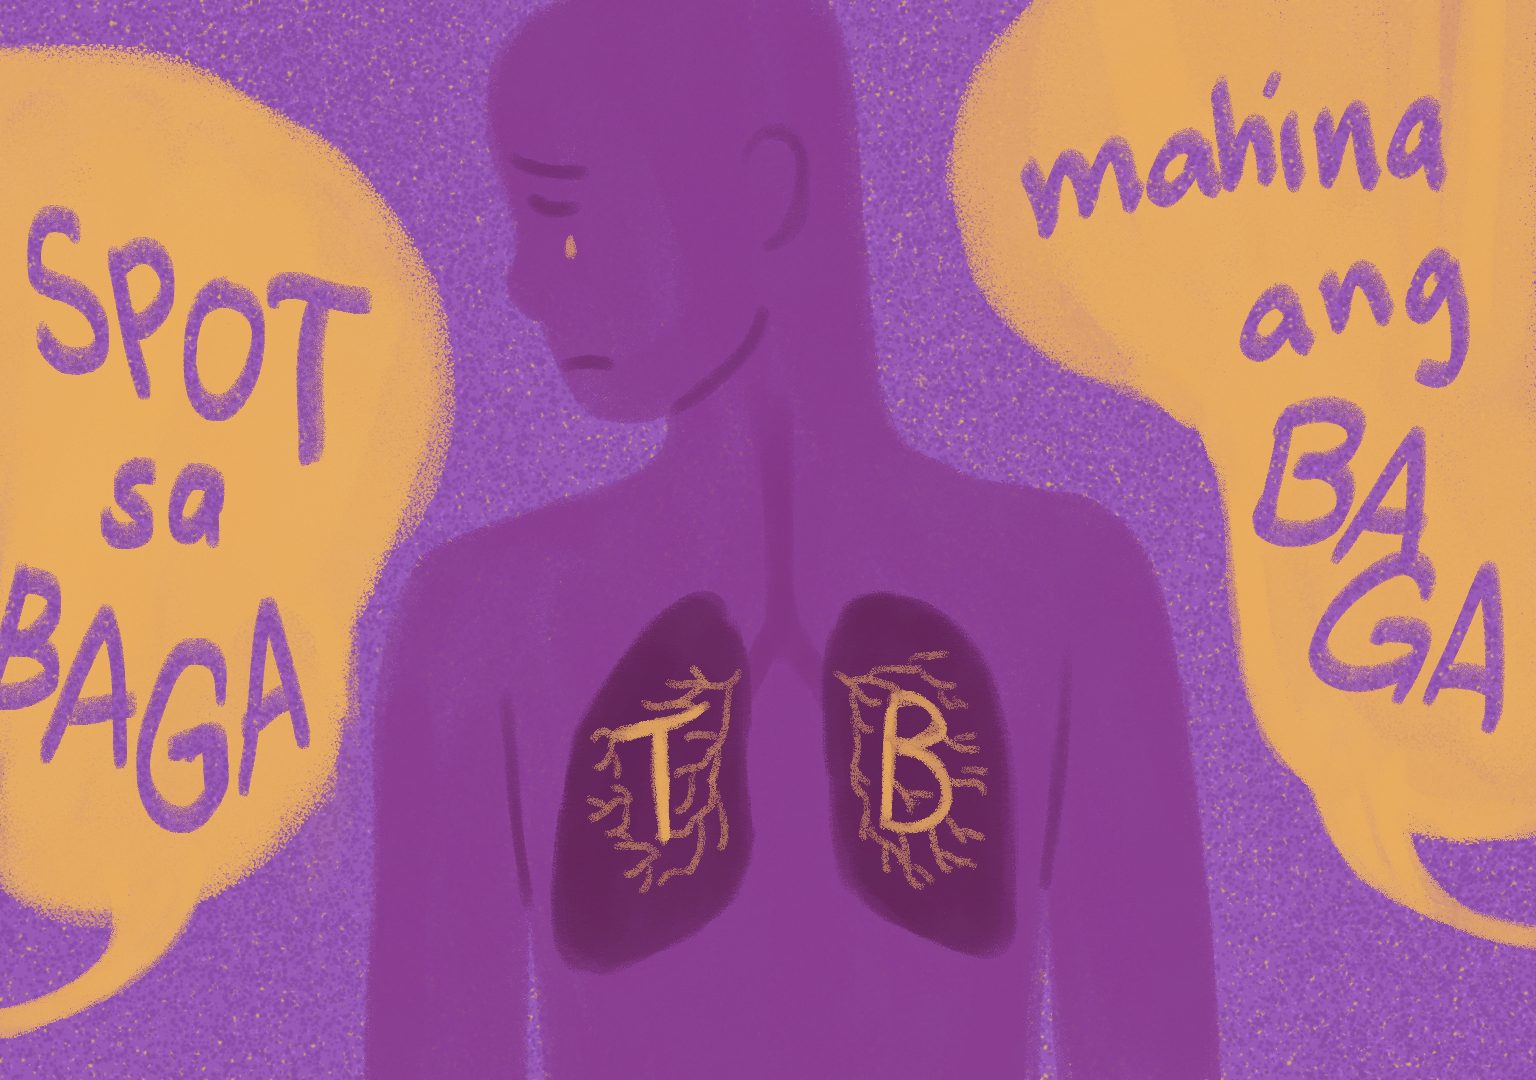 [Ilonggo Notes] Tuberculosis: Ancient scourge remains, stigma a barrier to elimination